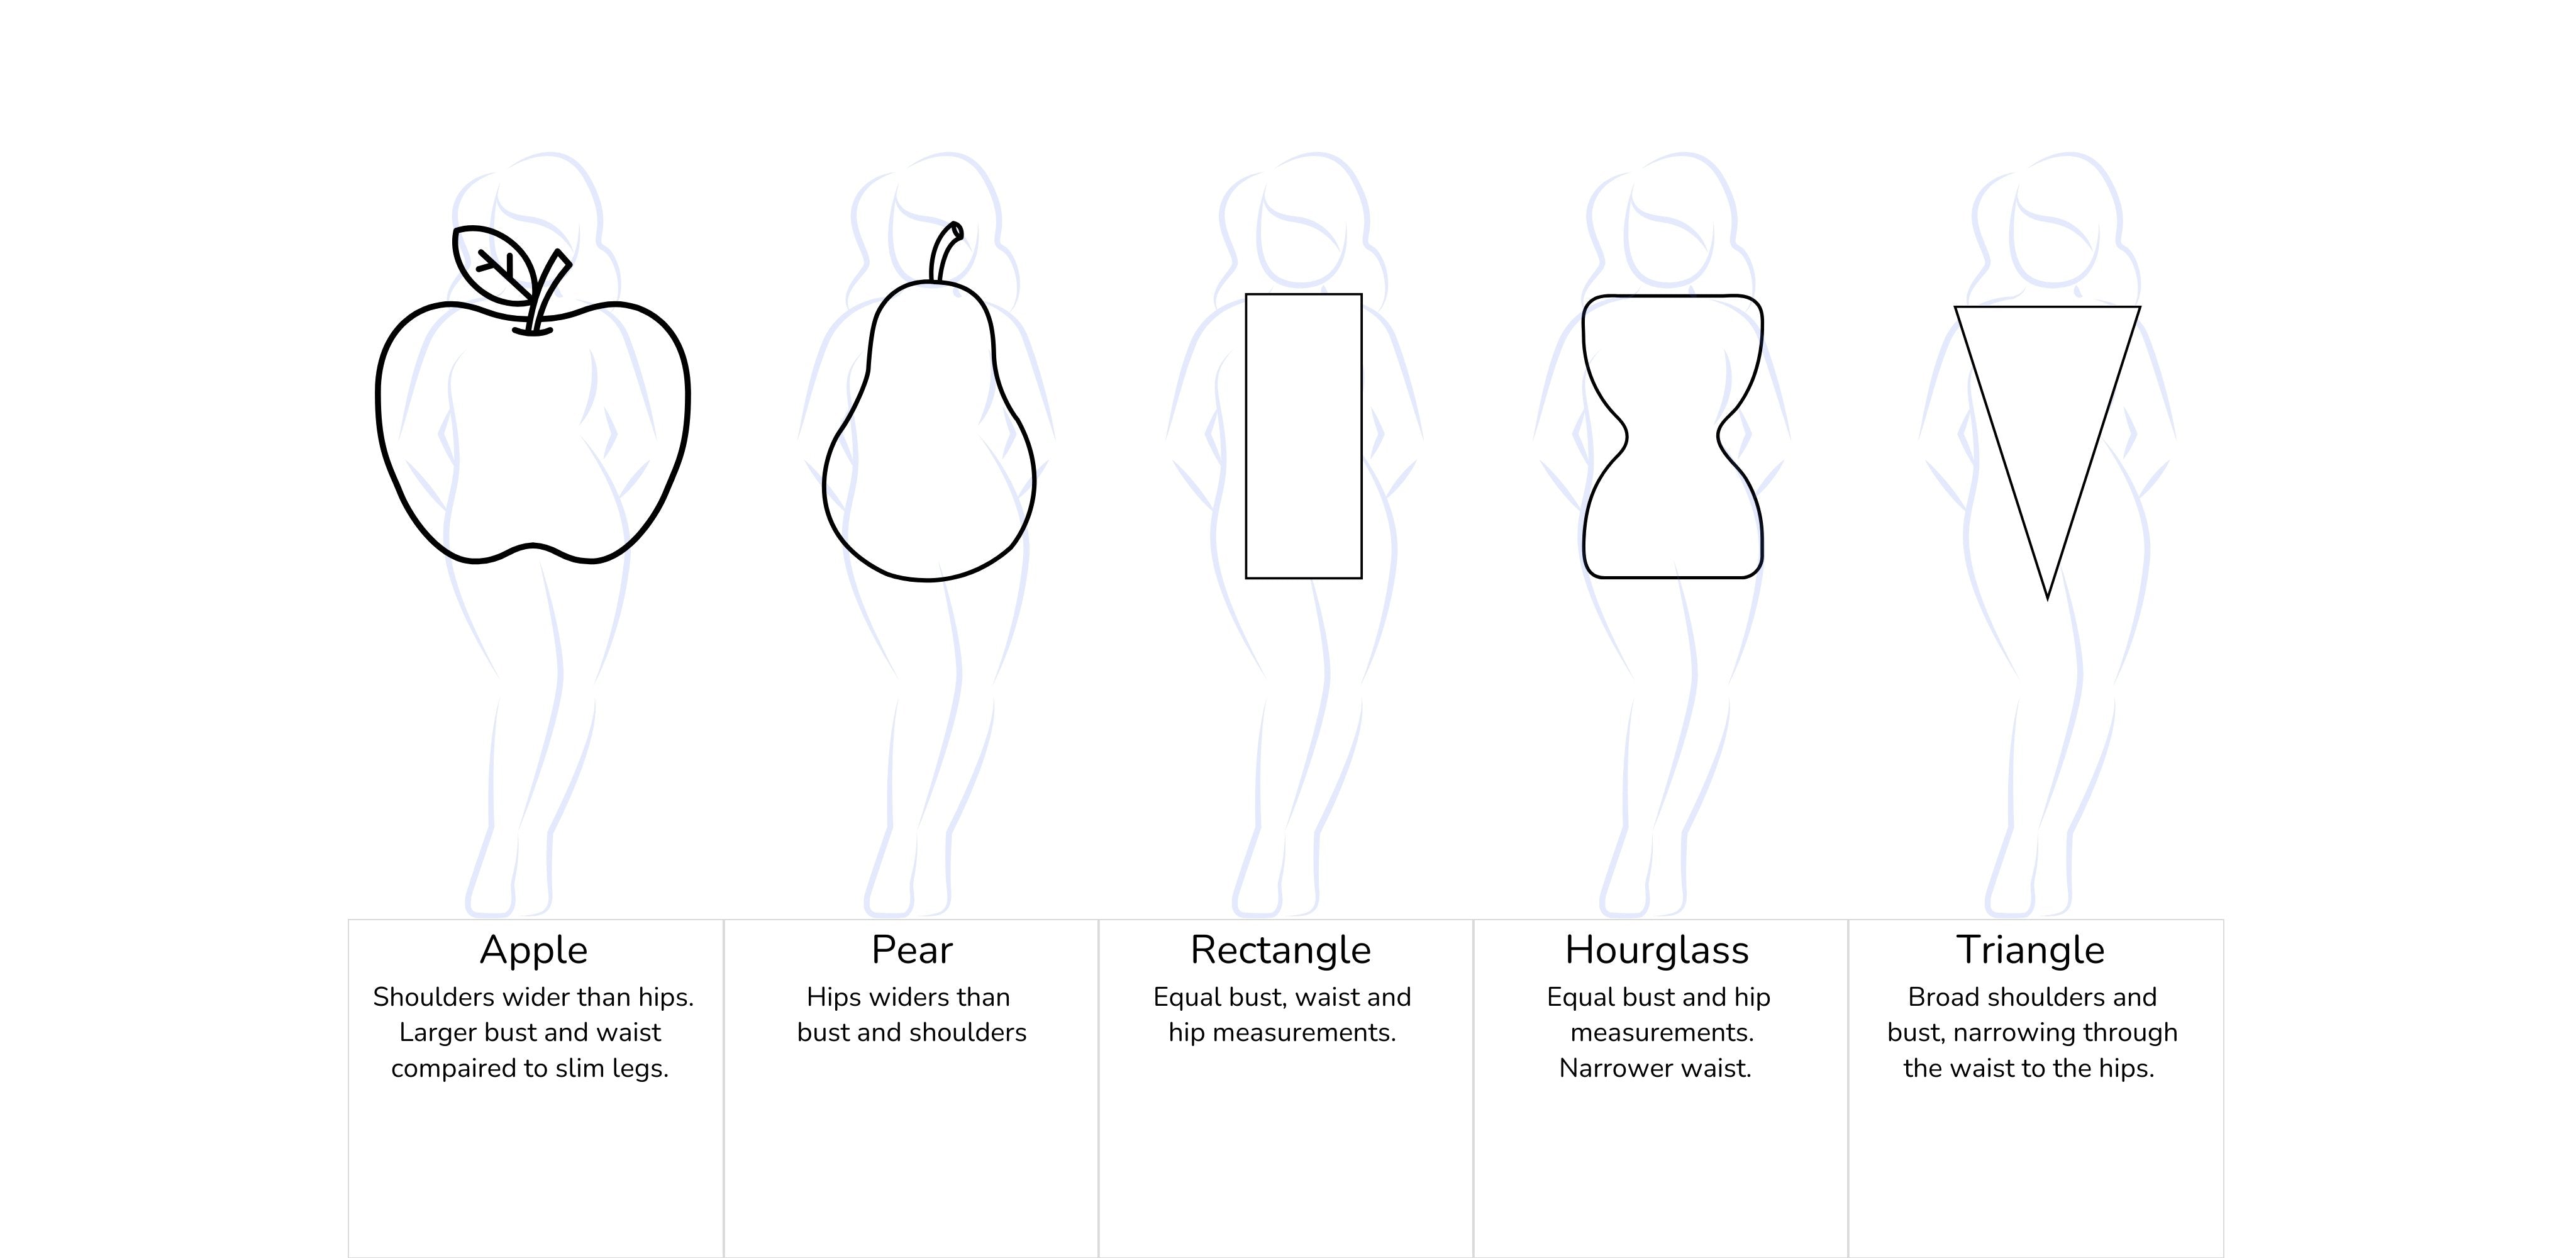 How to Dress Up for Pear Body Shape